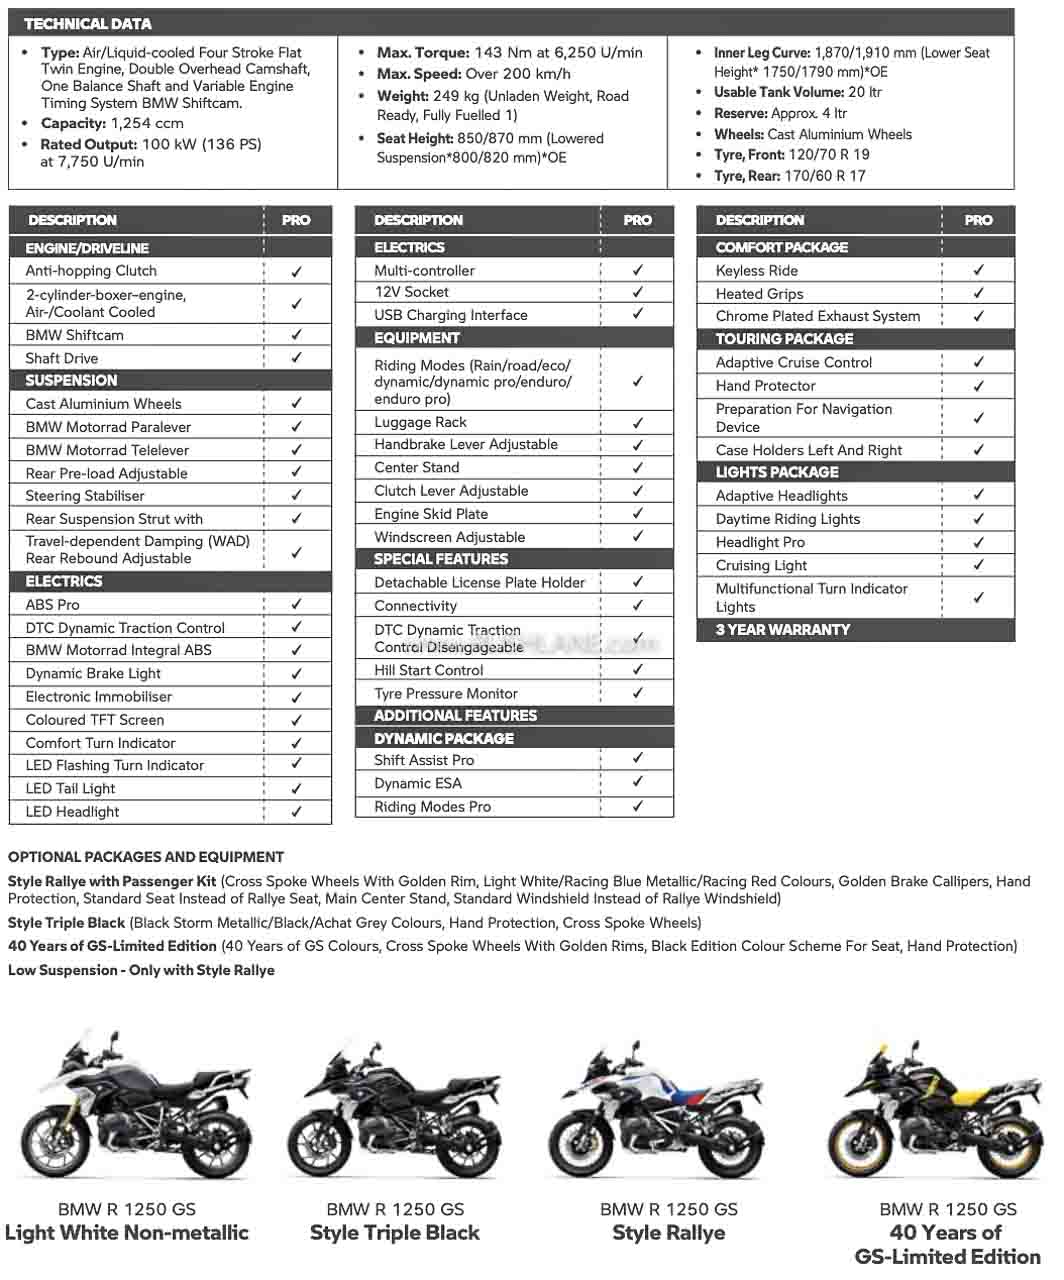 BMW R 1250 GS Bike Price in India